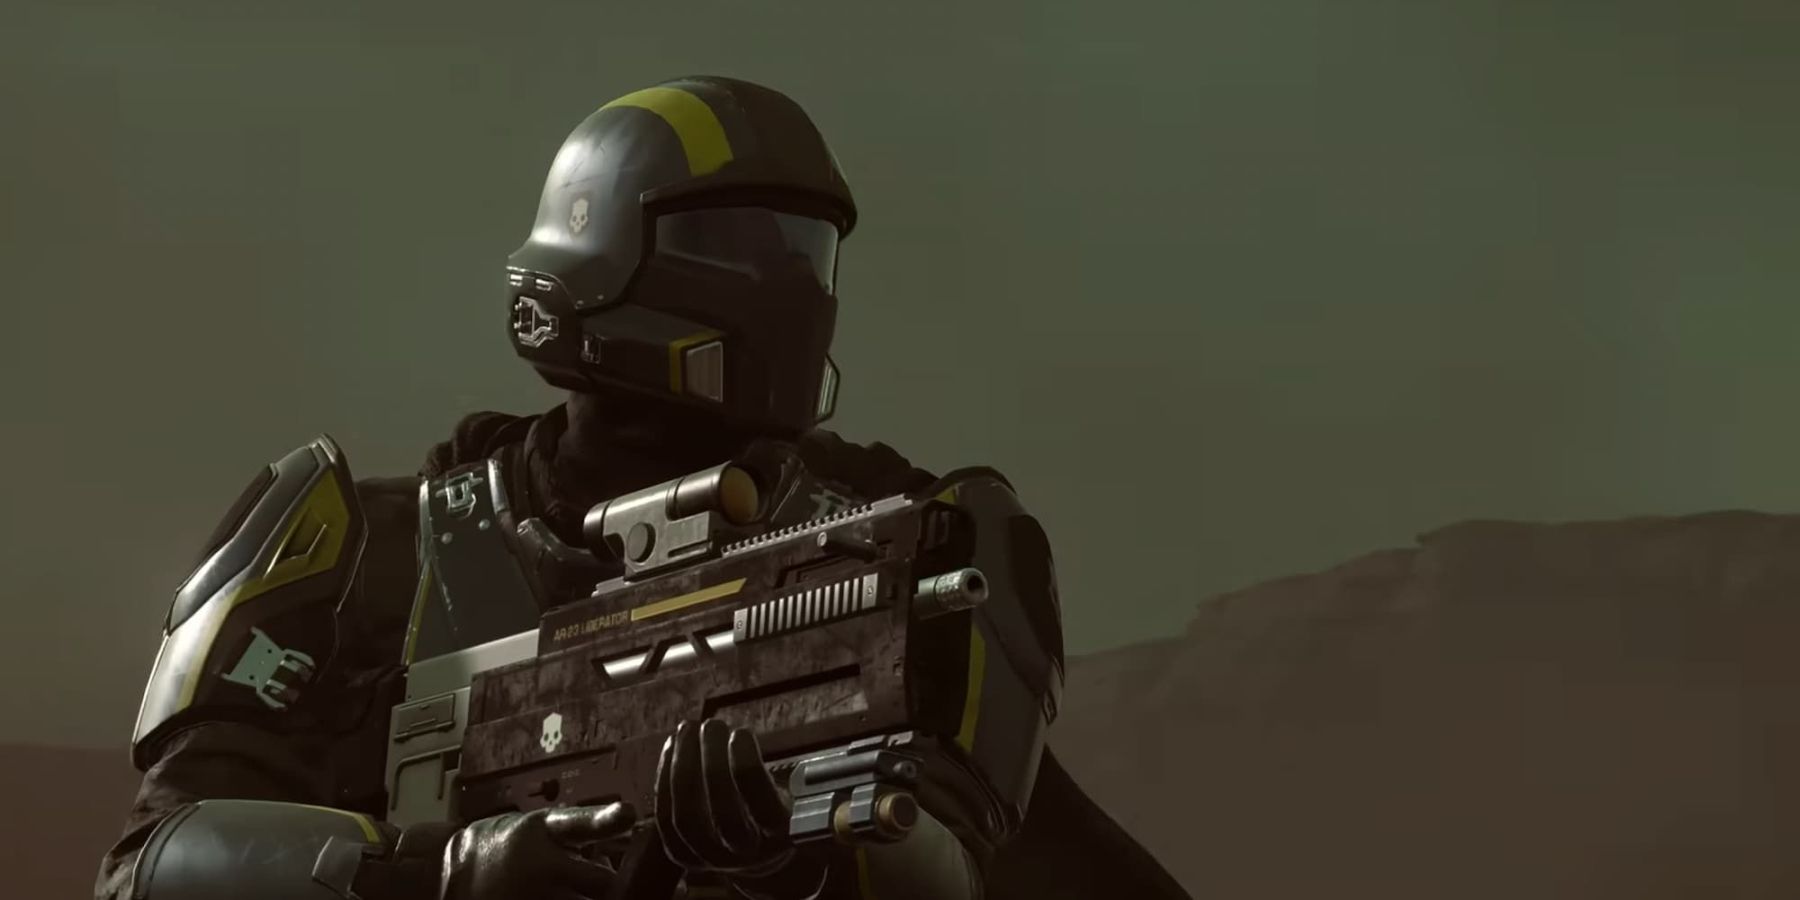 destiny 2 player's guardian design looks just like a helldivers character